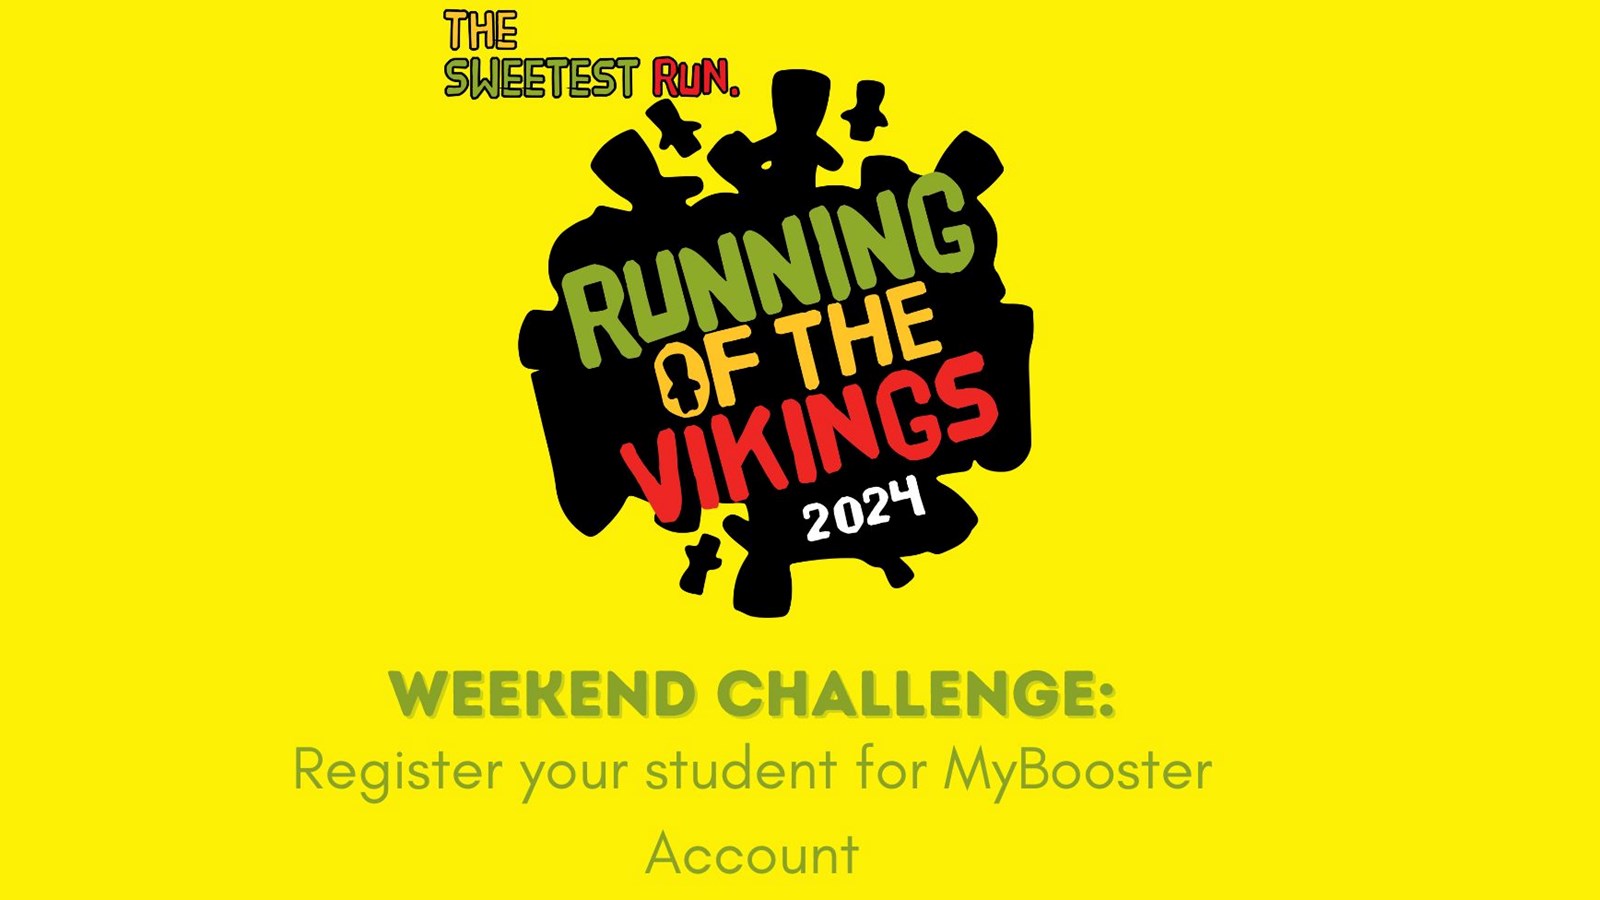 Weekend challenge: register for a MyBooster account